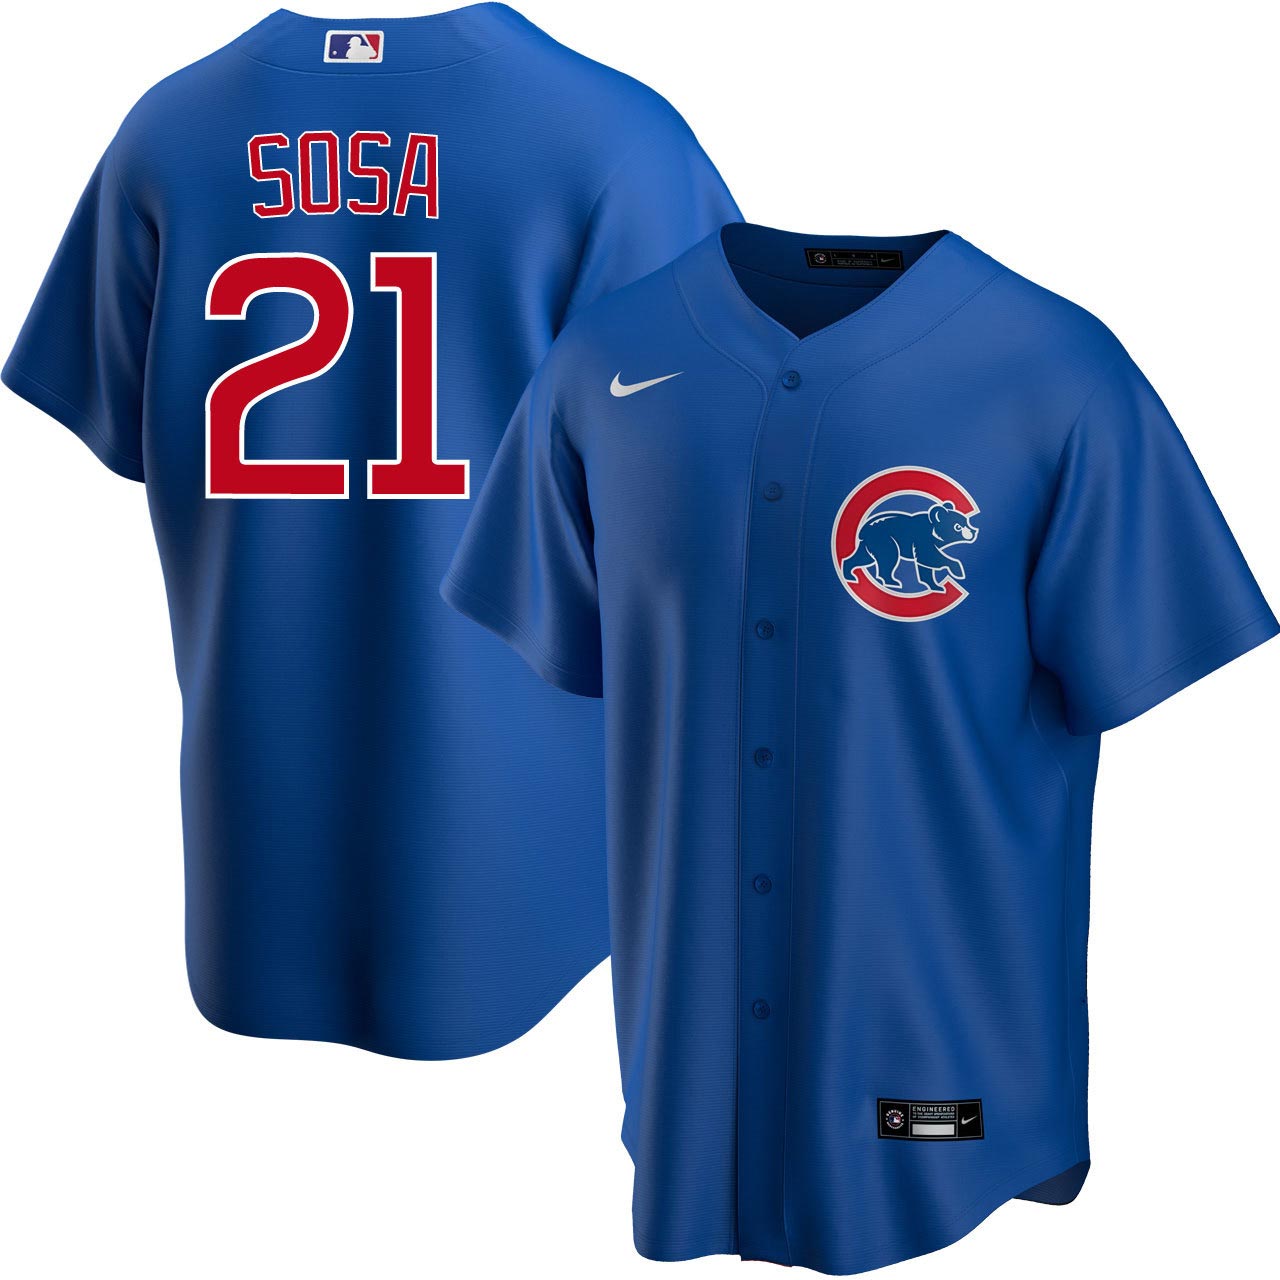 Sammy Sosa Chicago Cubs Men's Home White Wrigley 100th Cooperstown Jersey